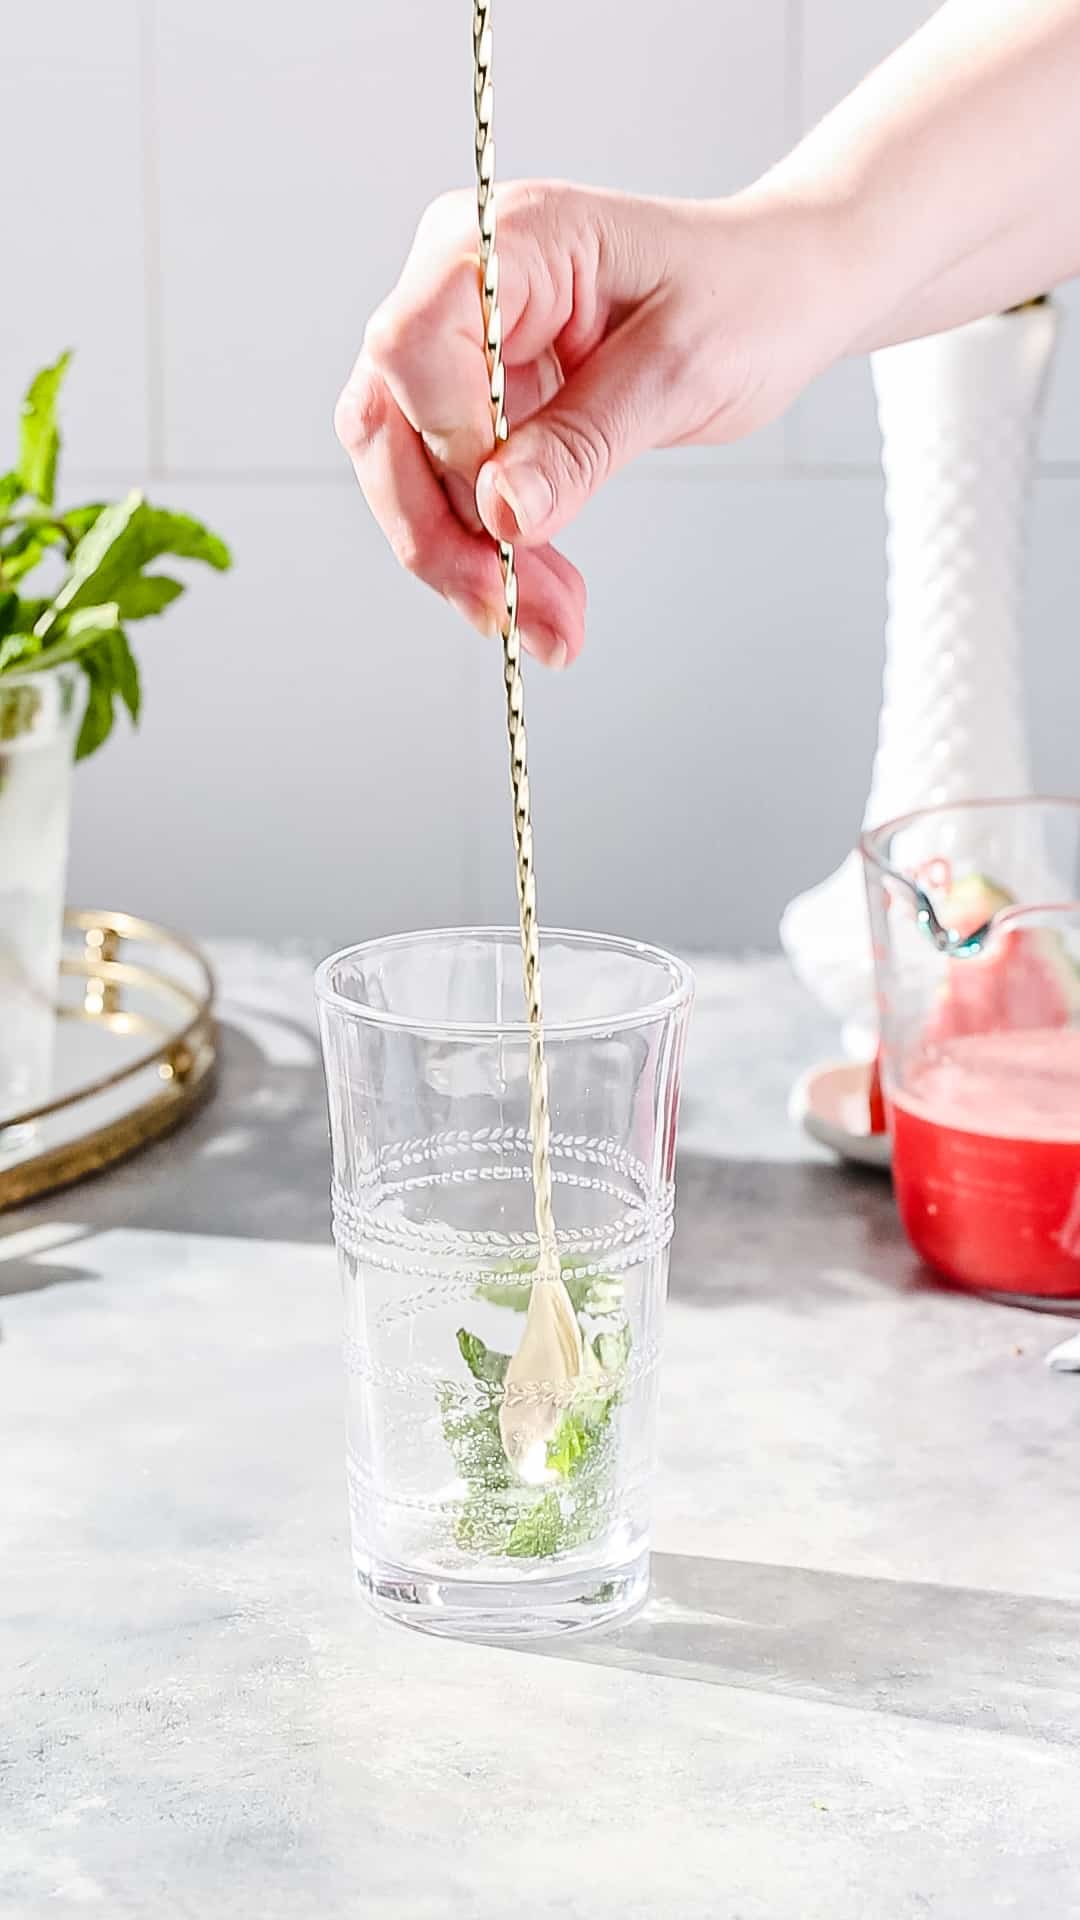 Hand using a long bar spoon to stir mint and sugar together in a cocktail glass.